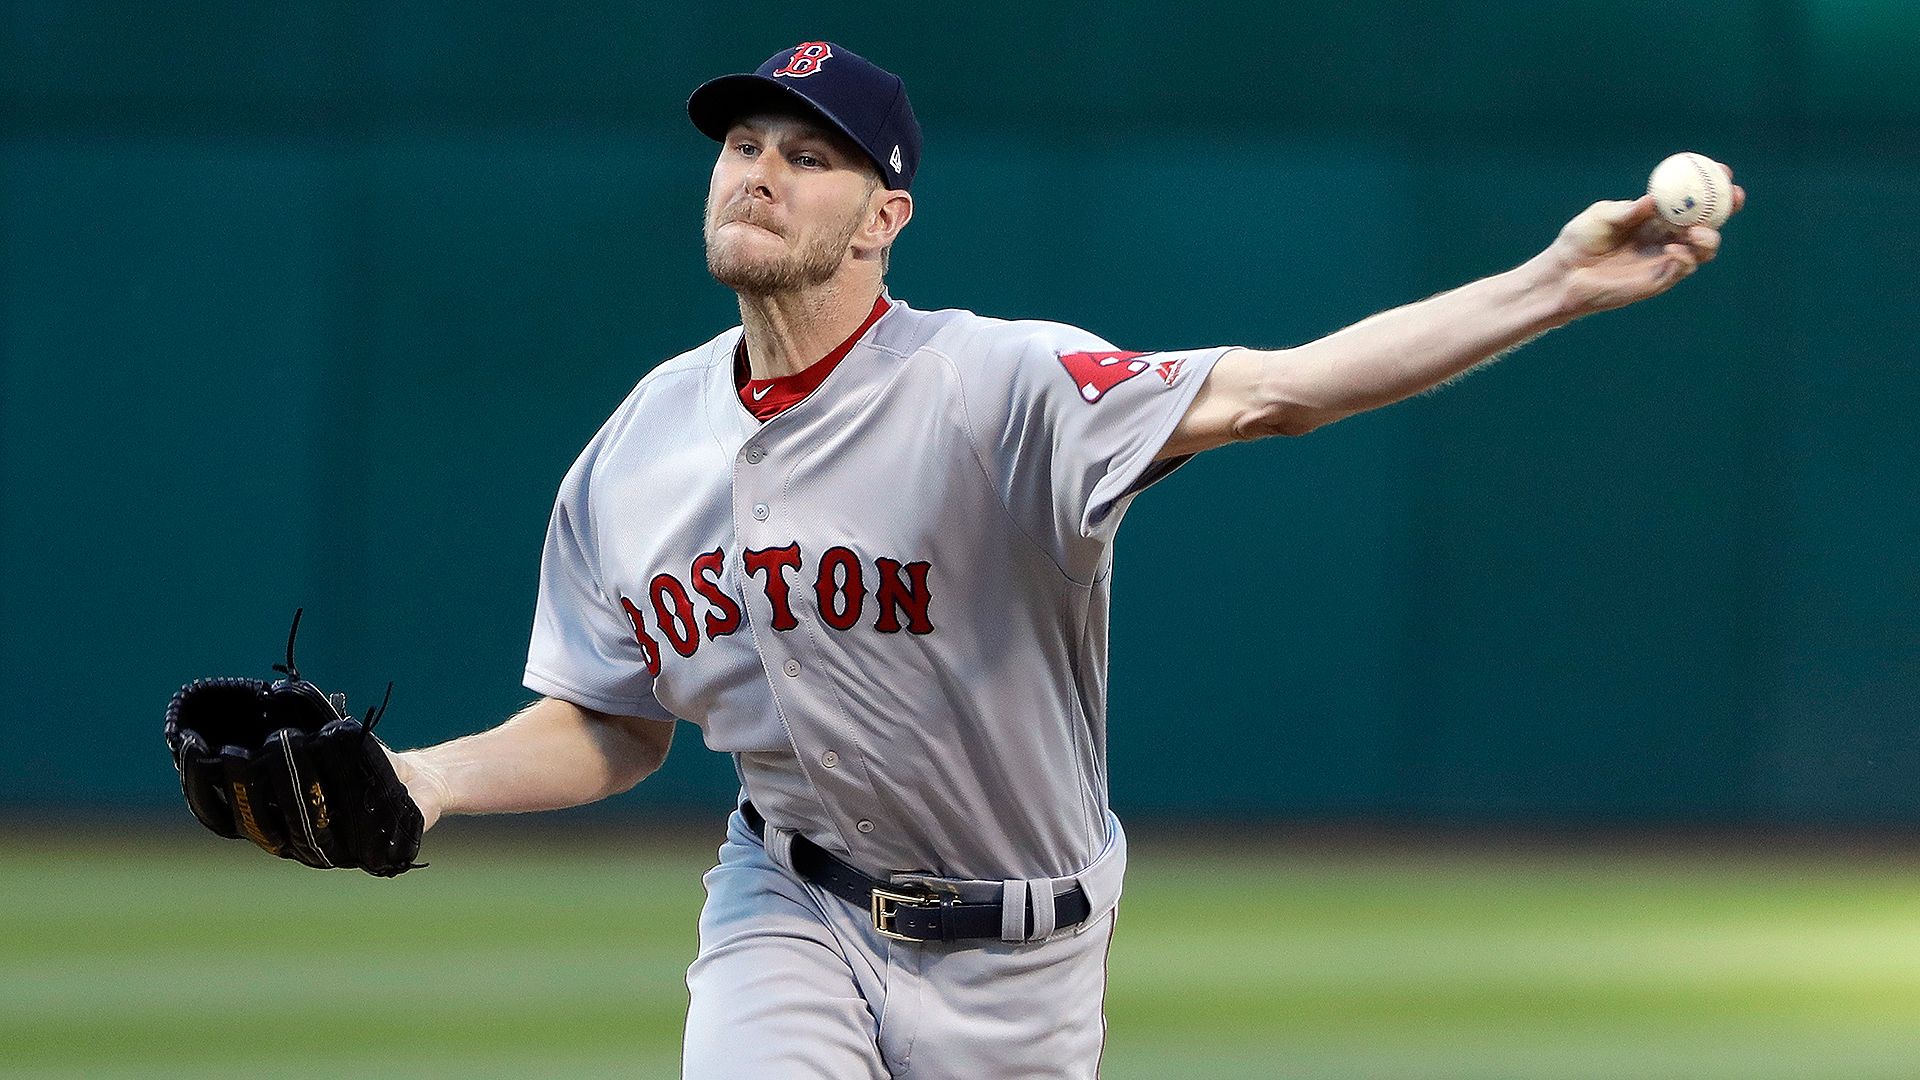 Chris Sale is throwing hard again and the results have been